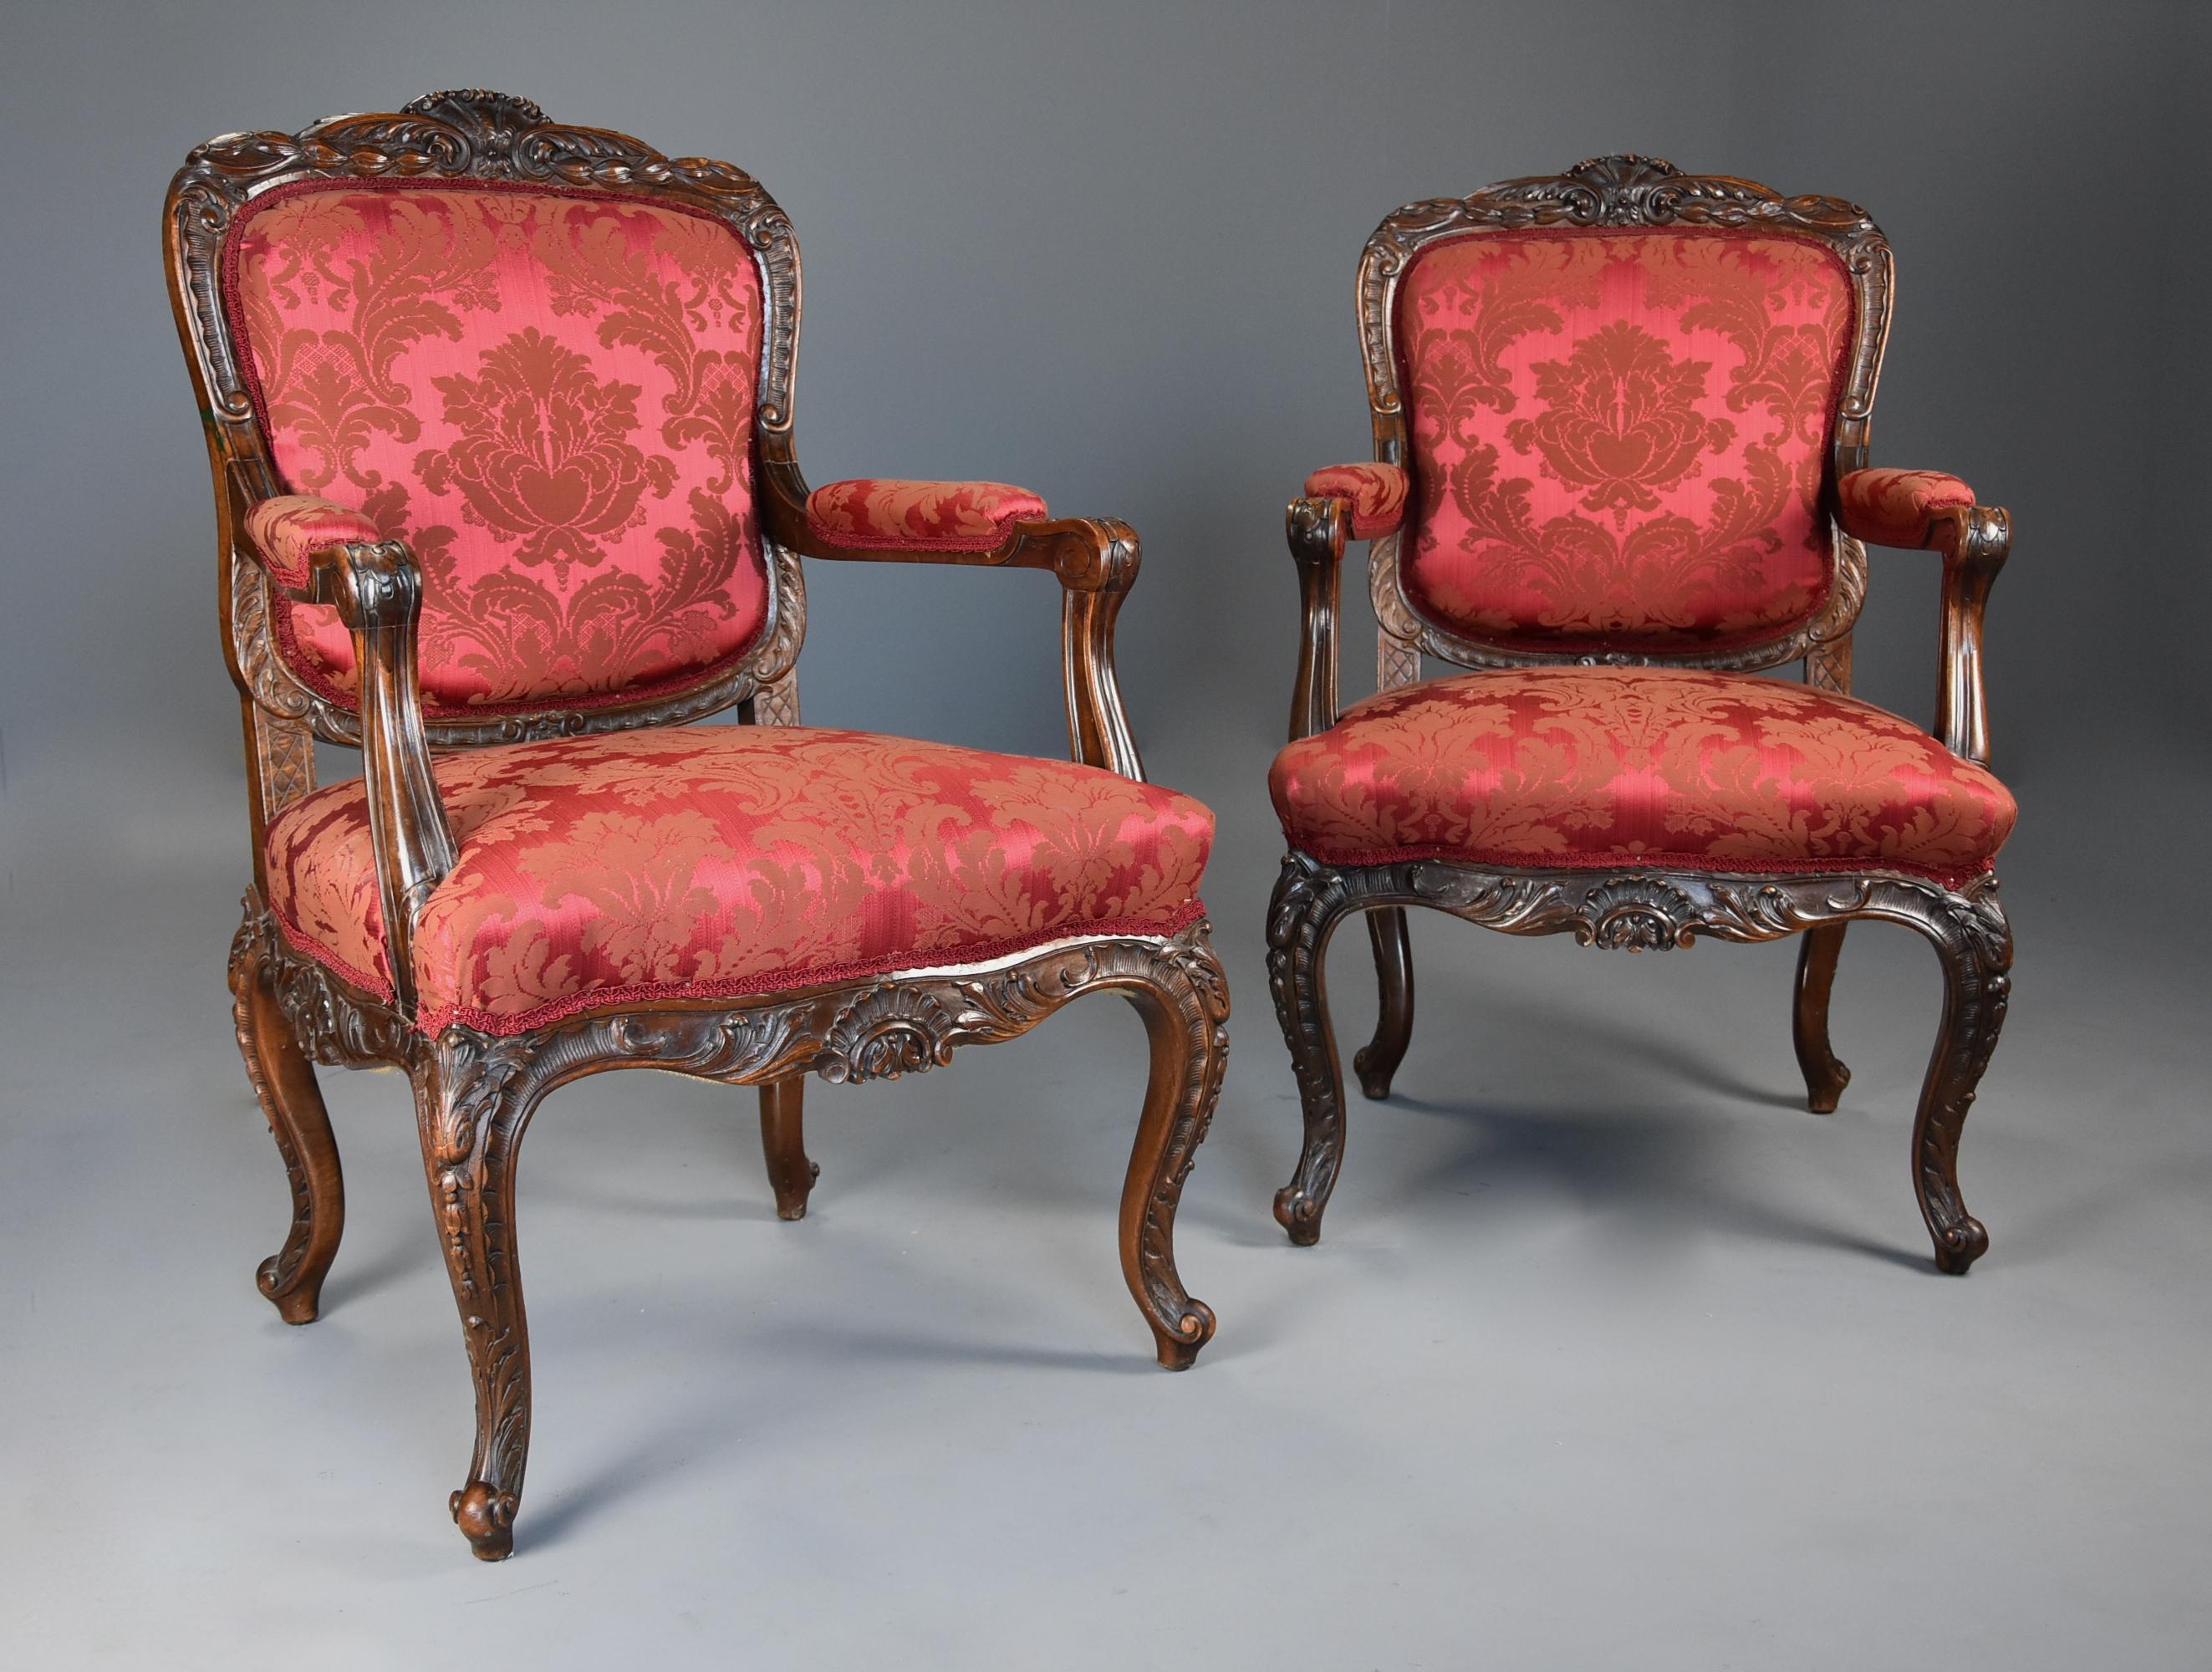 A pair of fine quality French 19th century, circa 1870 walnut fauteuils or open armchairs finished in a red damask fabric.

This pair of chairs consist of a finely carved top rail with central carved shell decoration with foliate and harebell